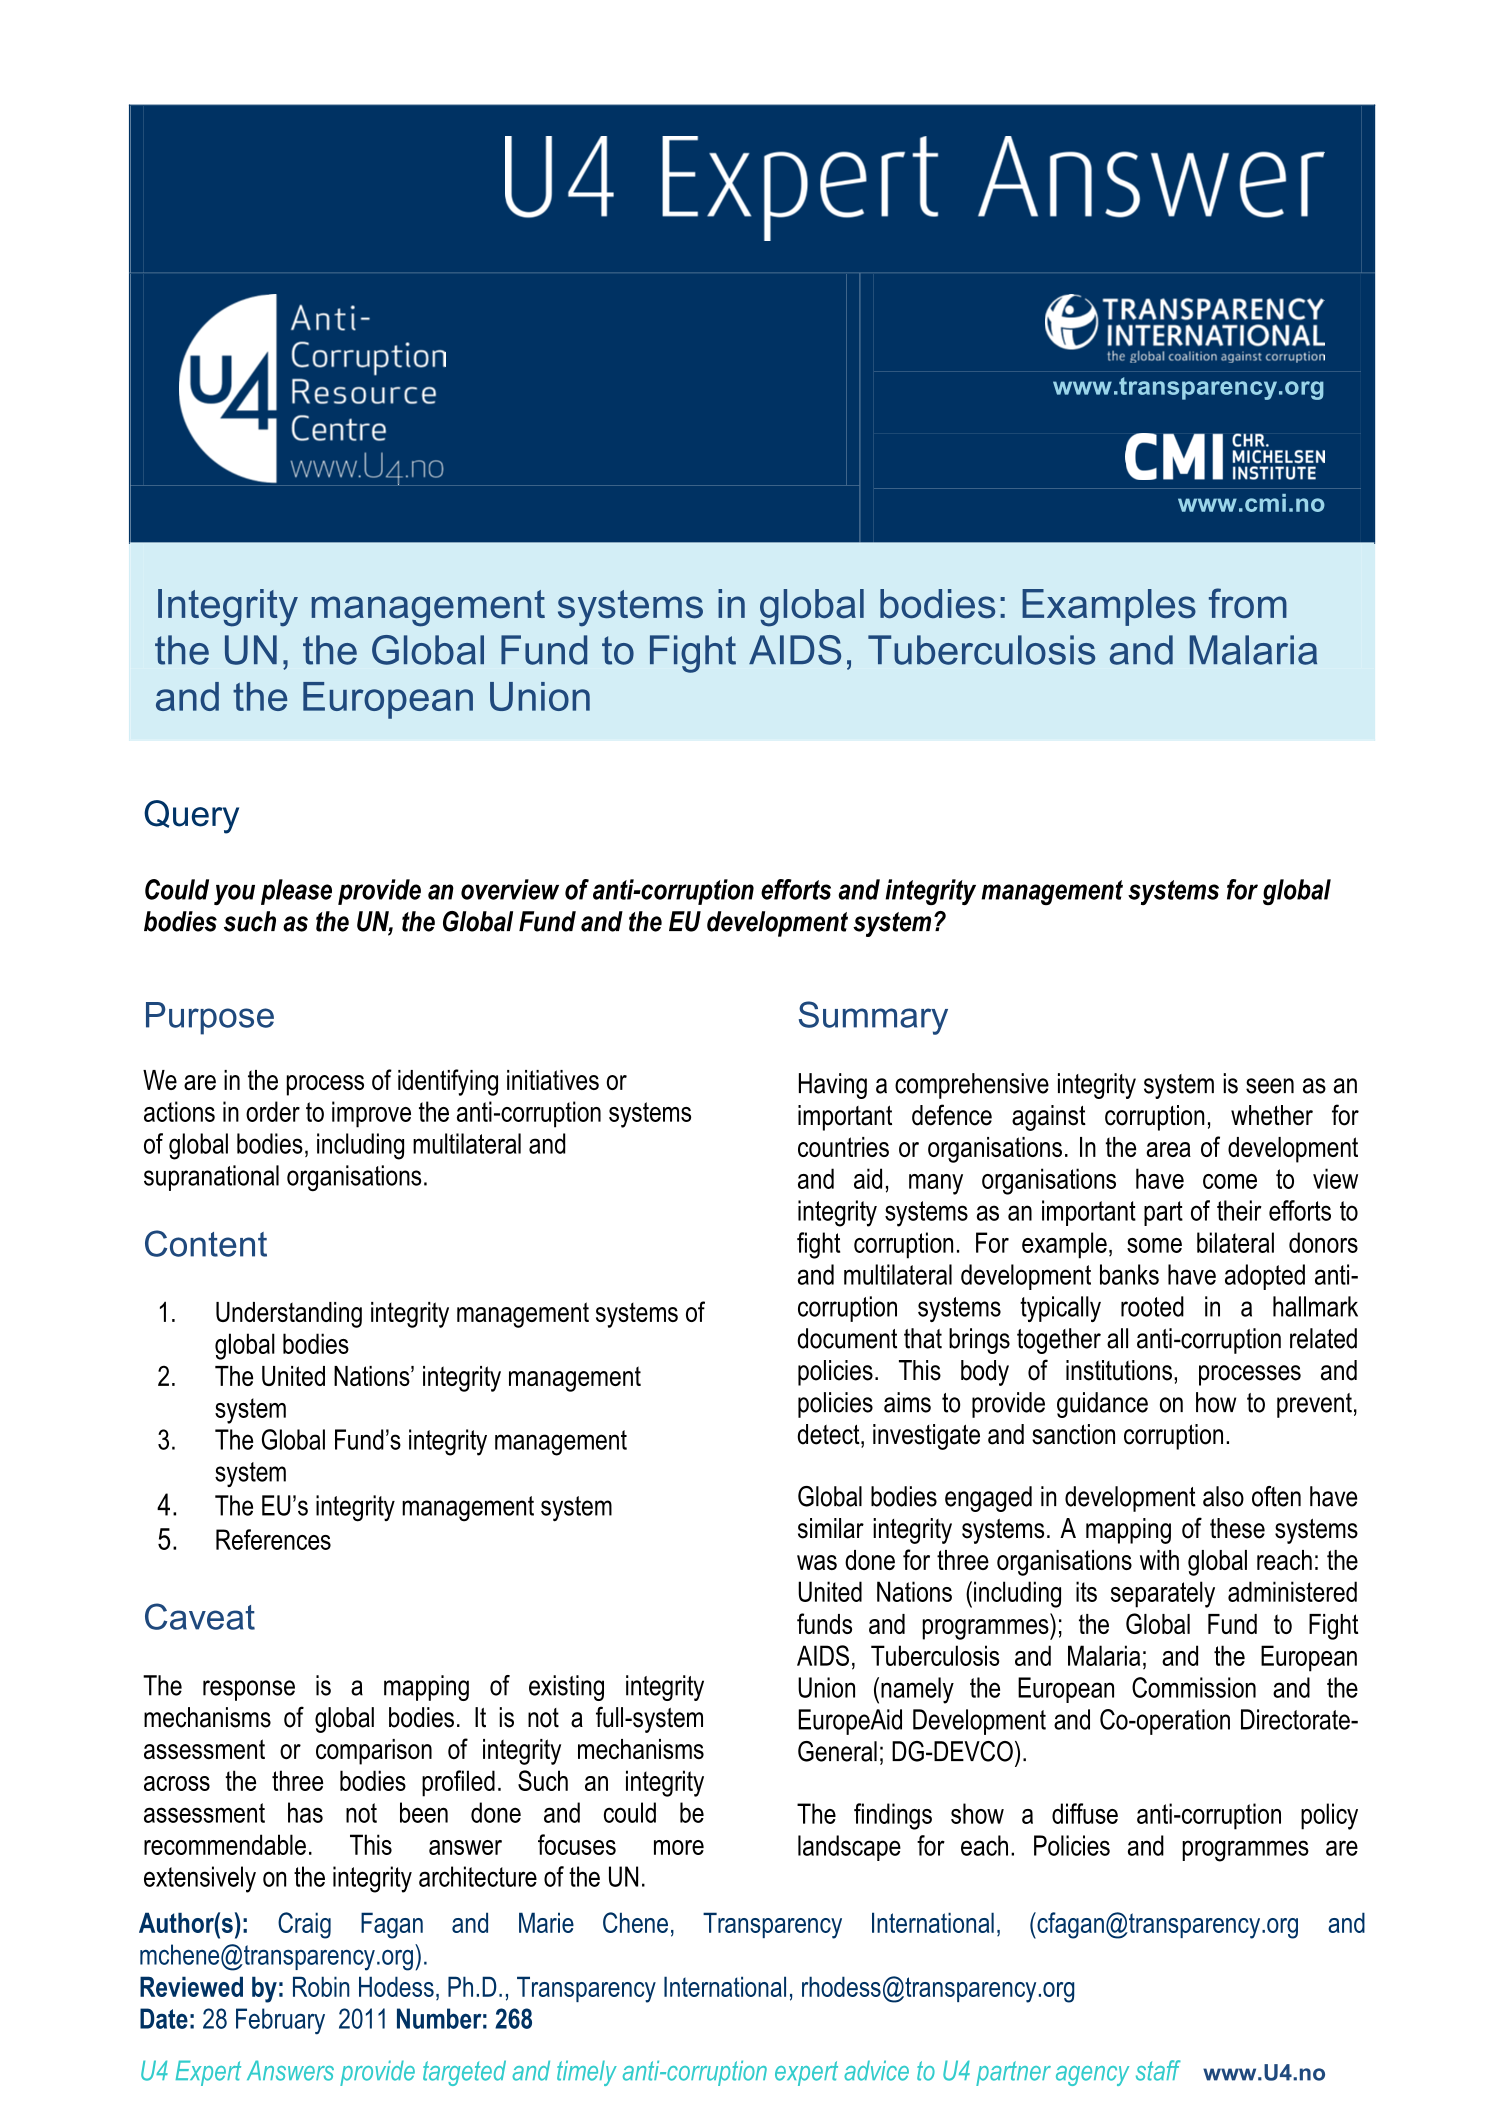 Integrity management systems in global bodies